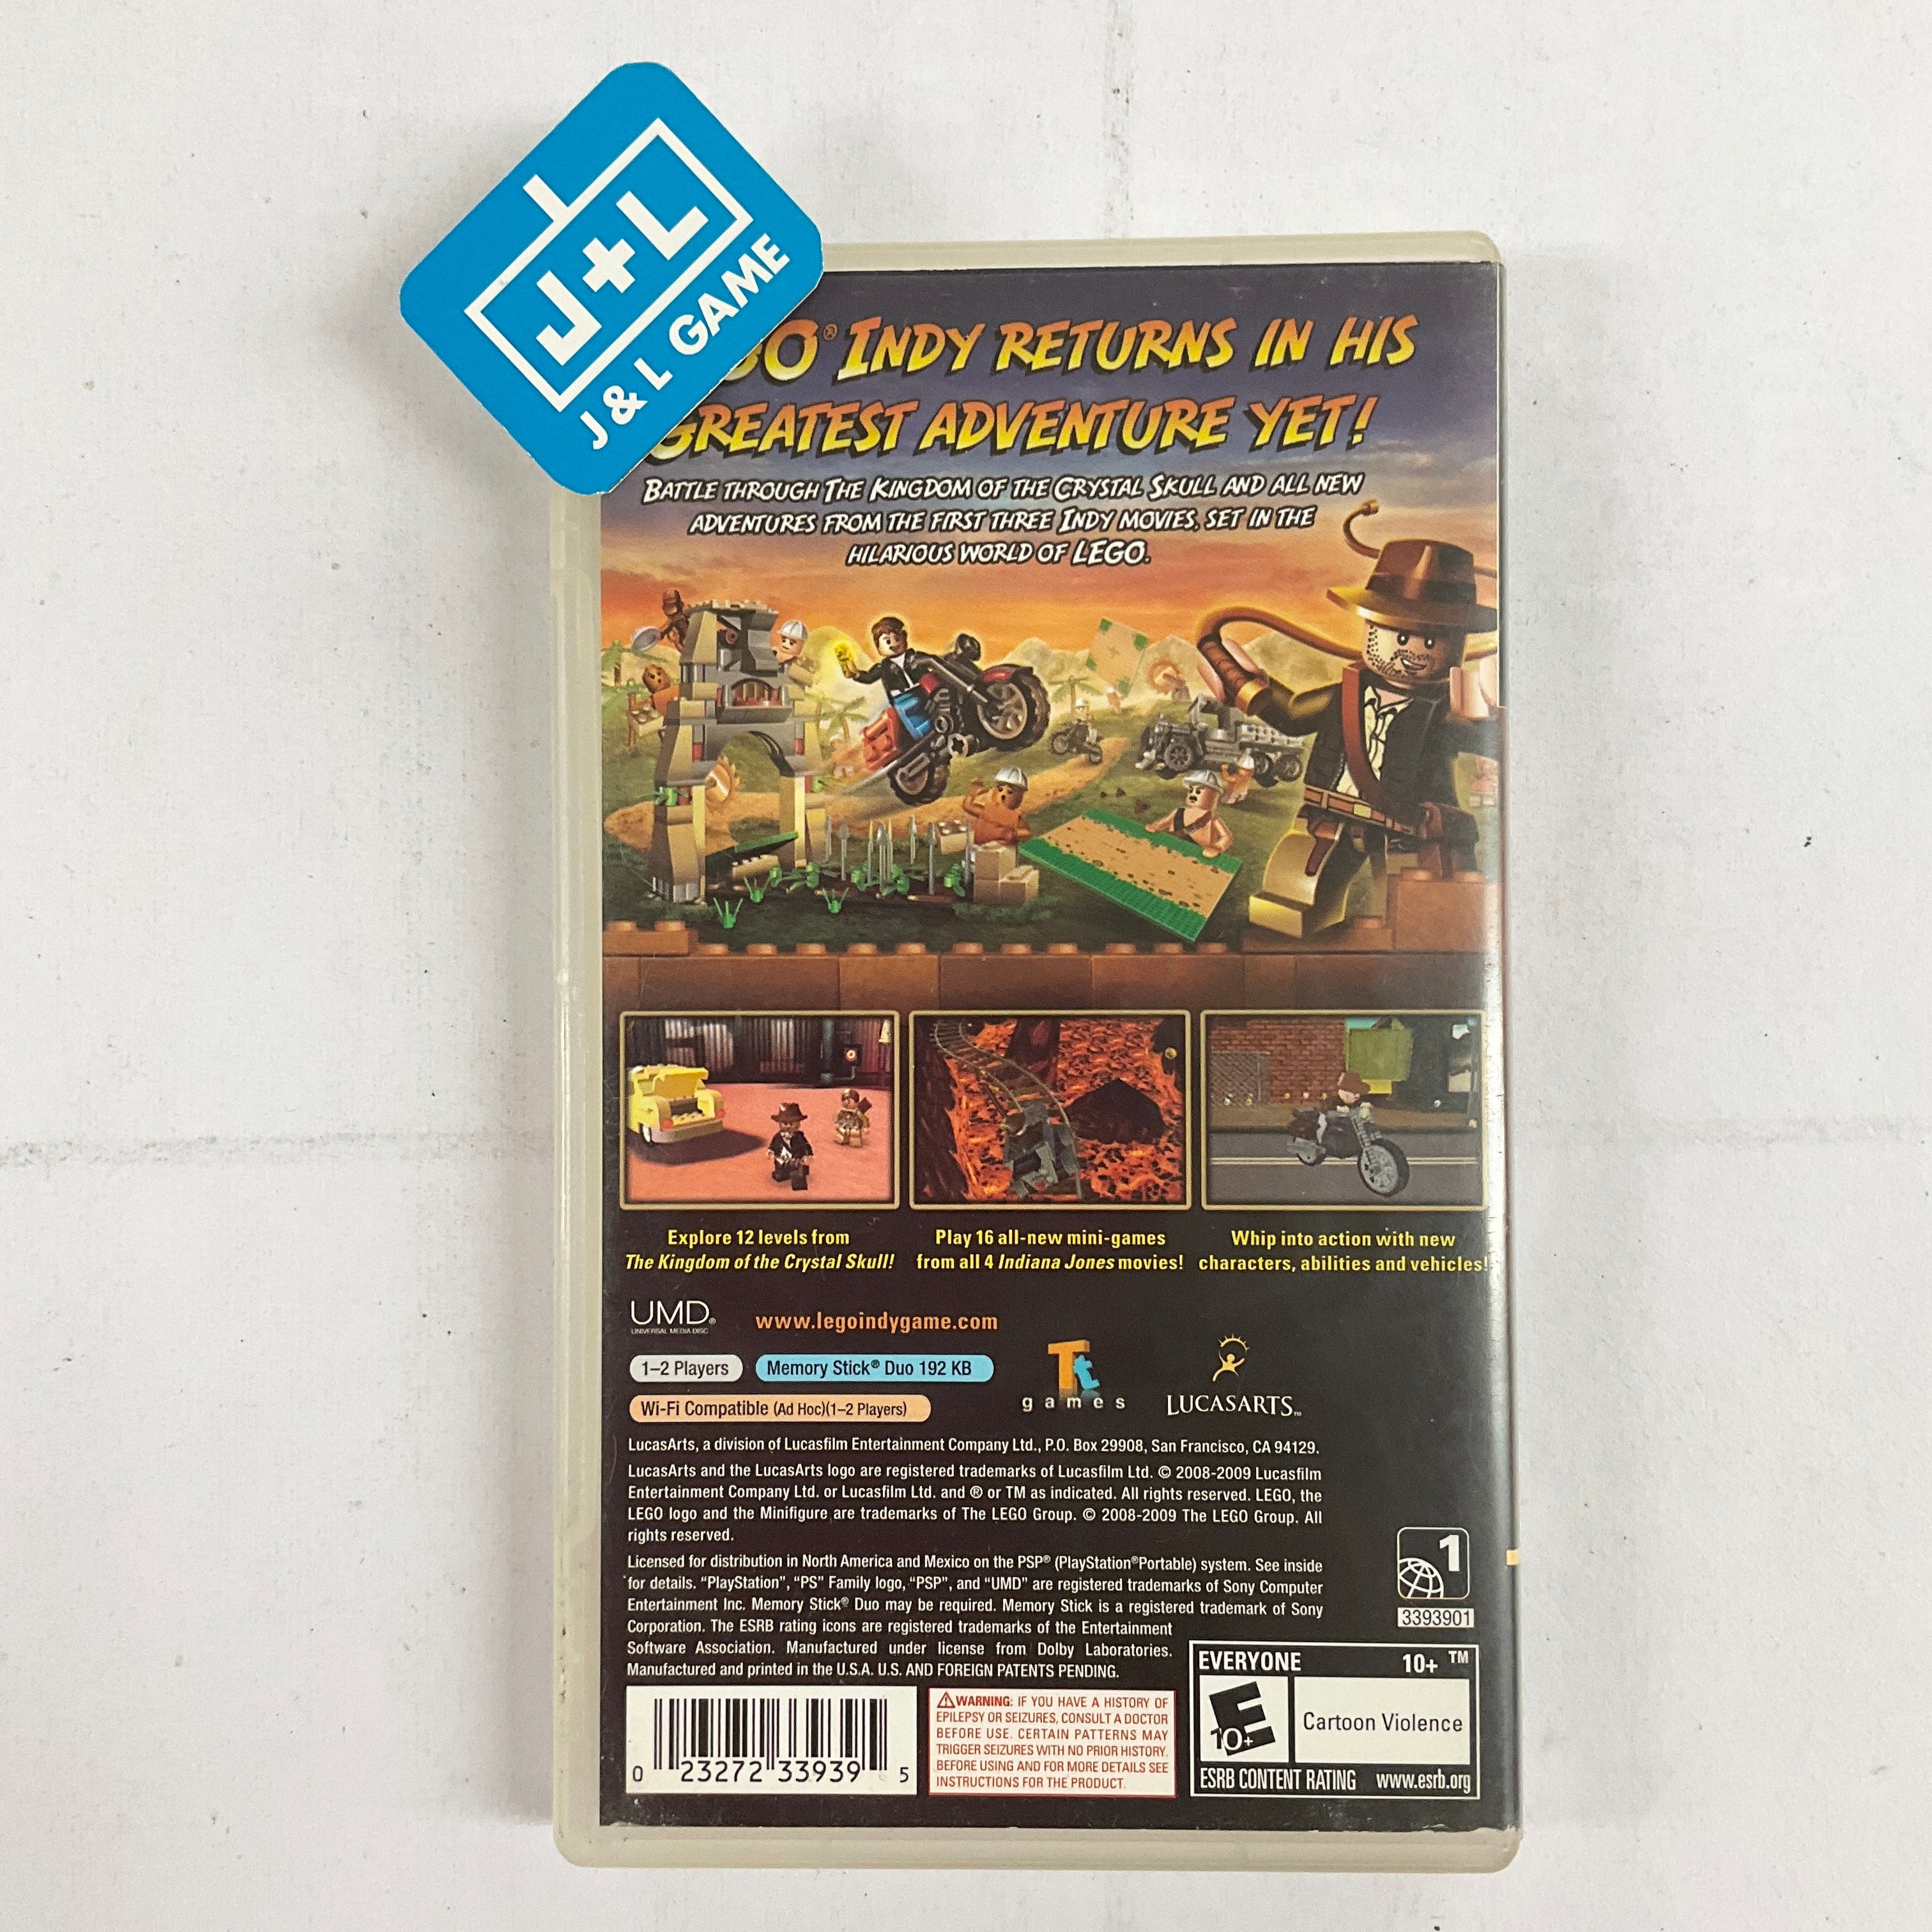 LEGO Indiana Jones 2: The Adventure Continues - Sony PSP [Pre-Owned] Video Games LucasArts   